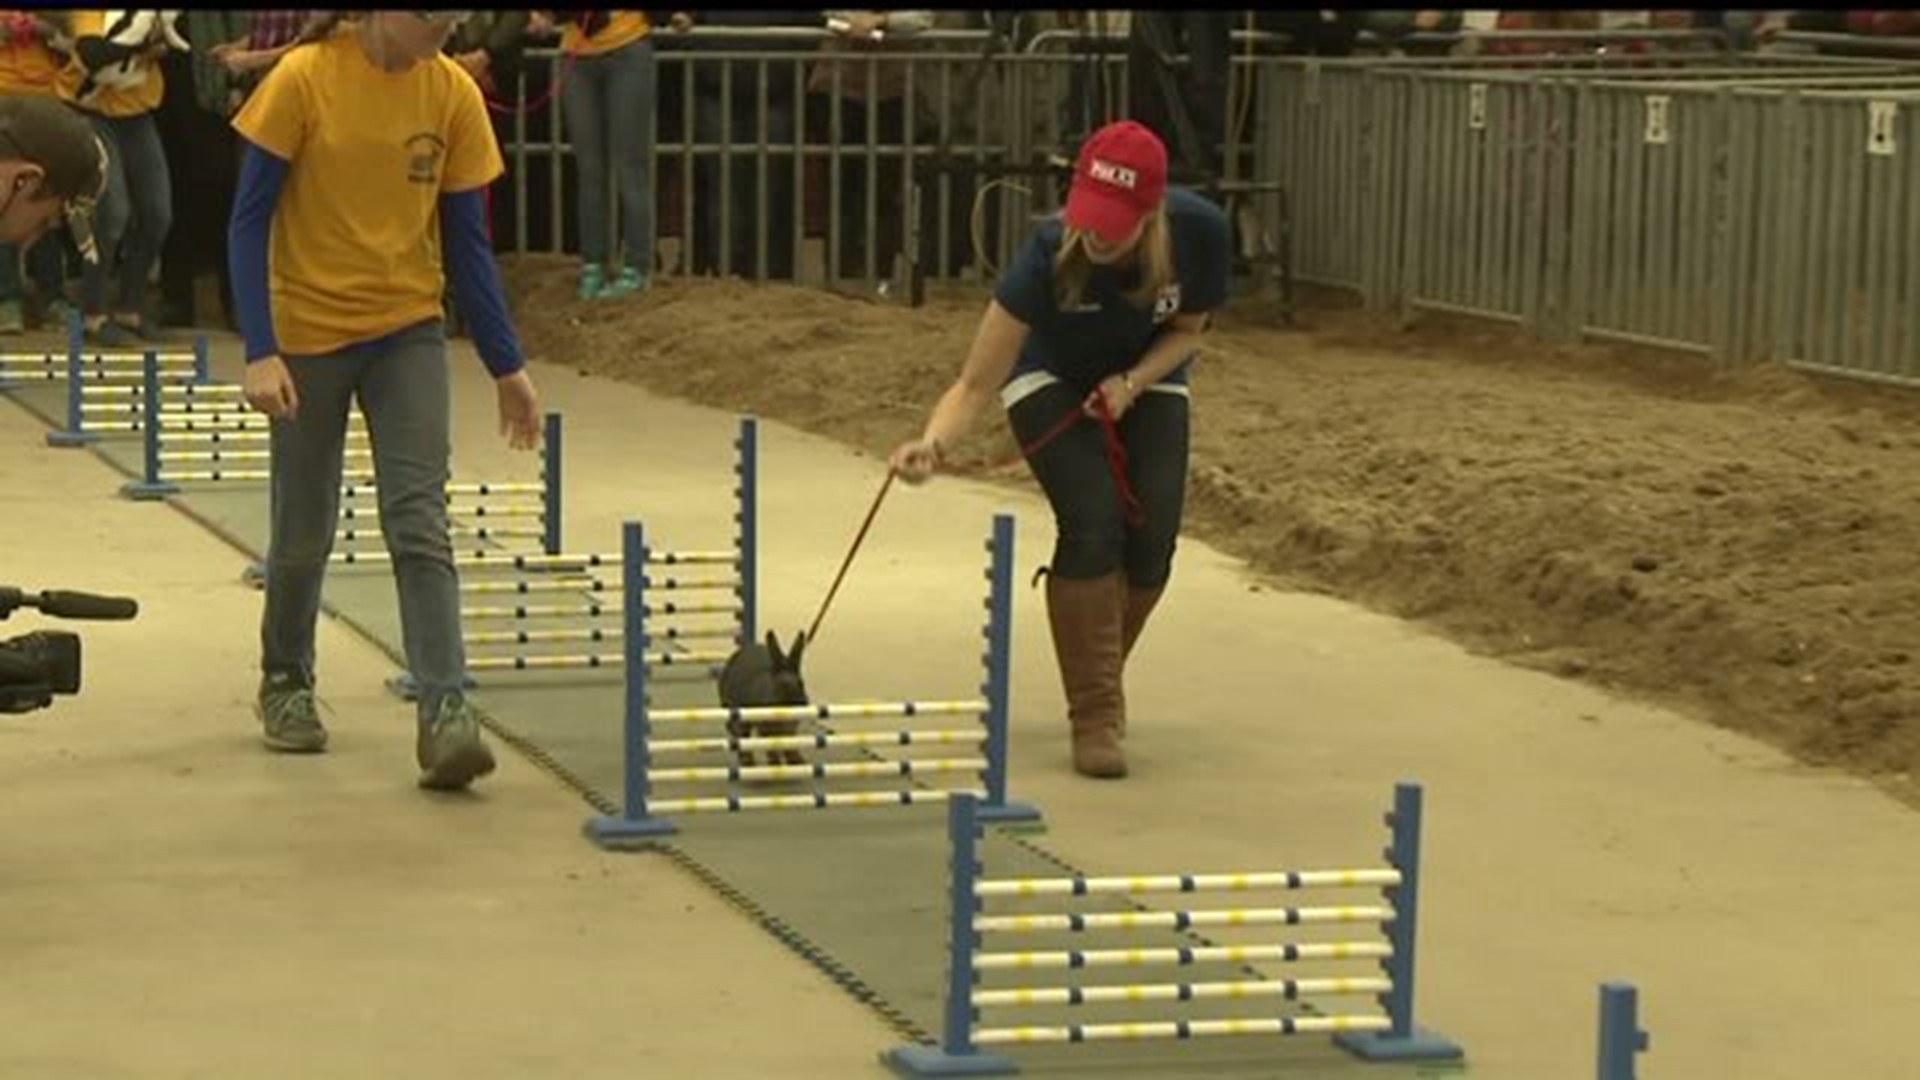 Rabbit hopping contest at the Farm Show